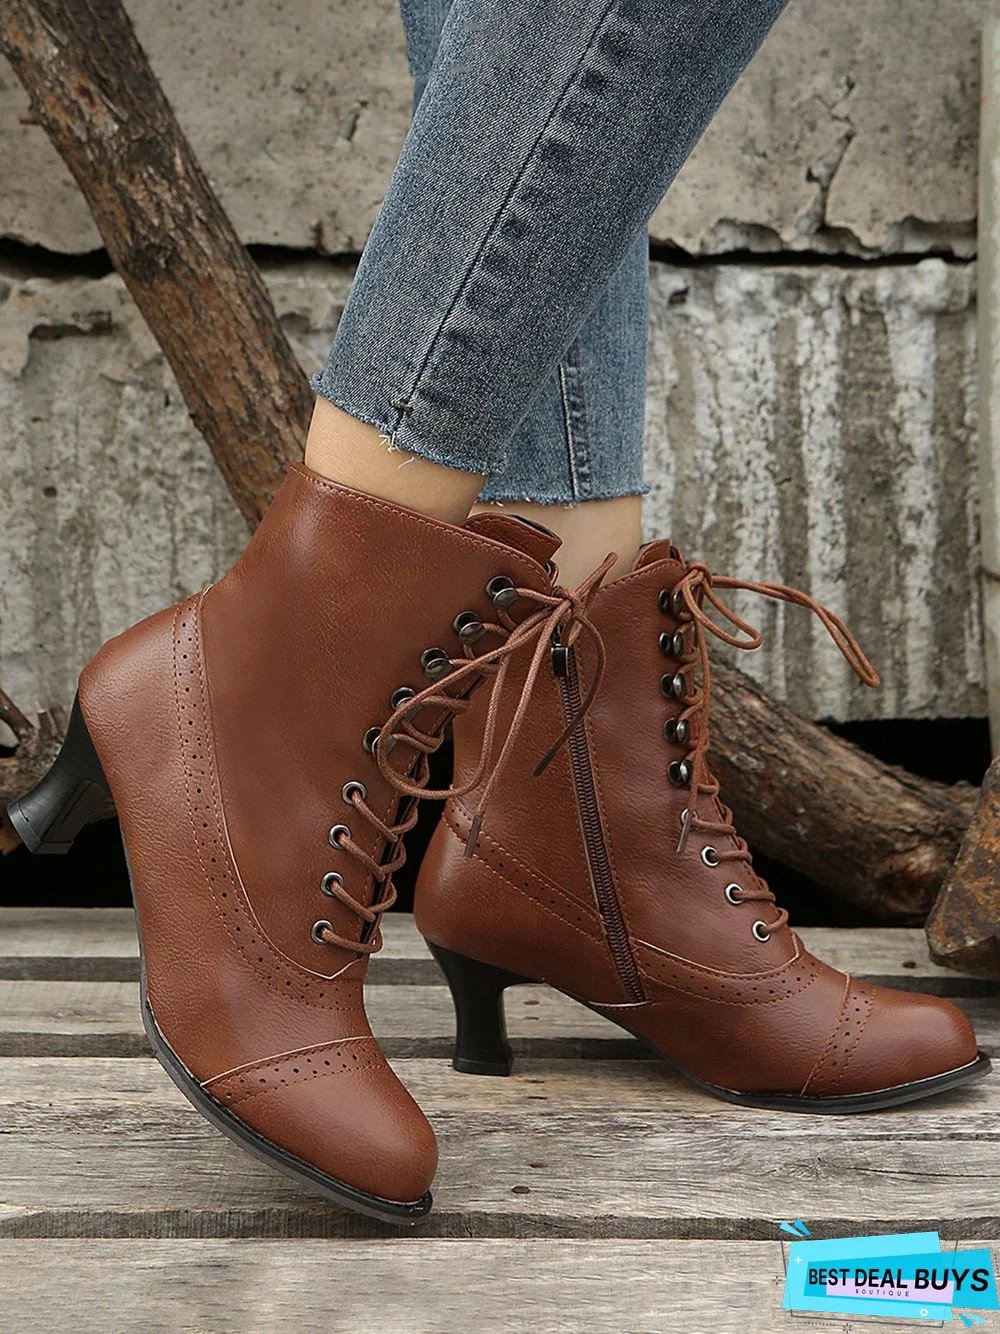 Lace-Up Decor Side Zip Spool Heel Boots